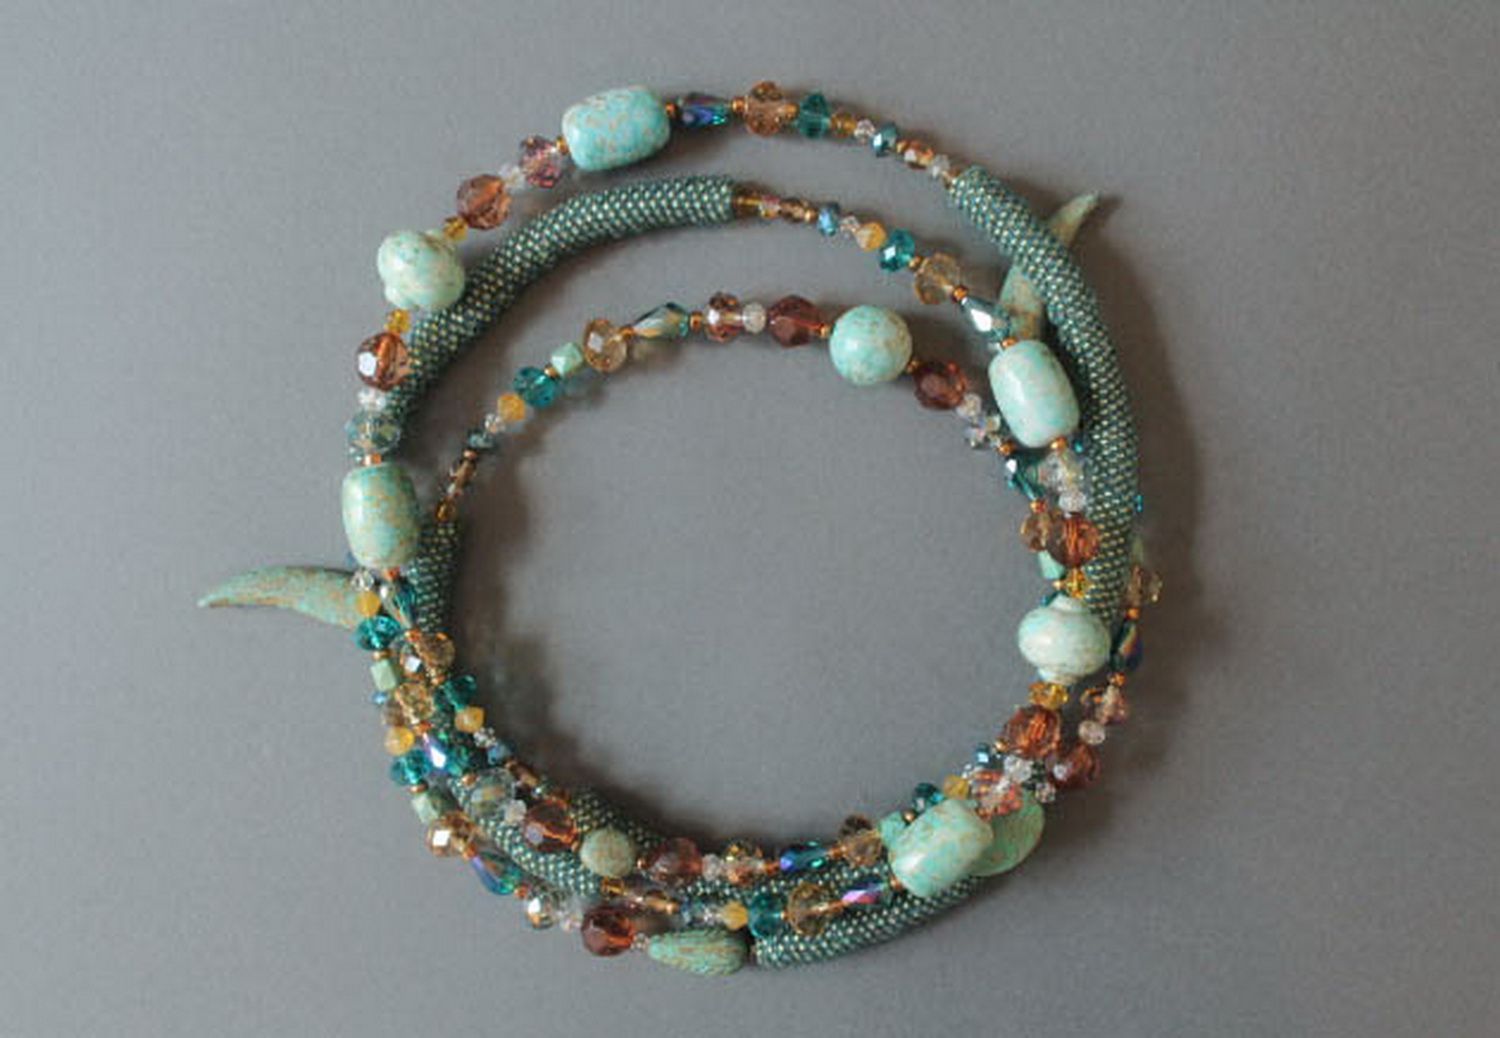 Plaited necklace made from beads with decorative stones photo 7